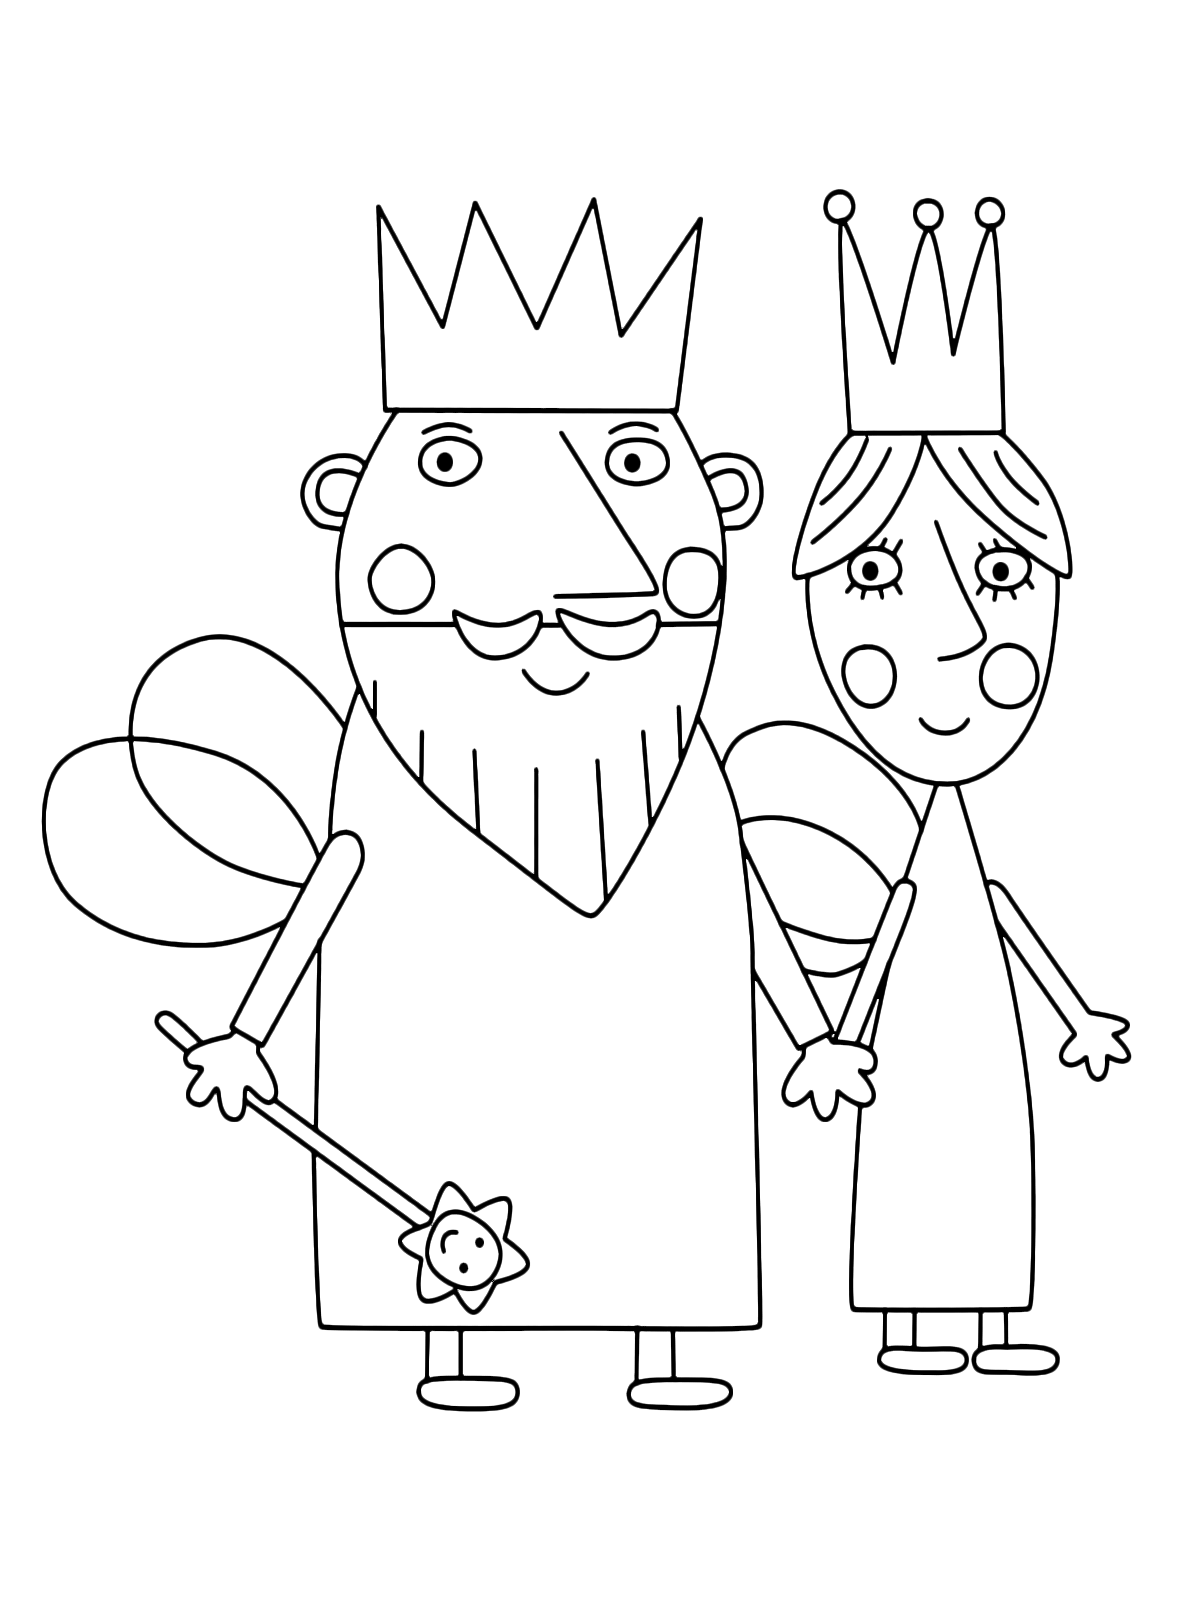 Ben & Holly's Little Kingdom - The King and Queen Thistle together by the hand